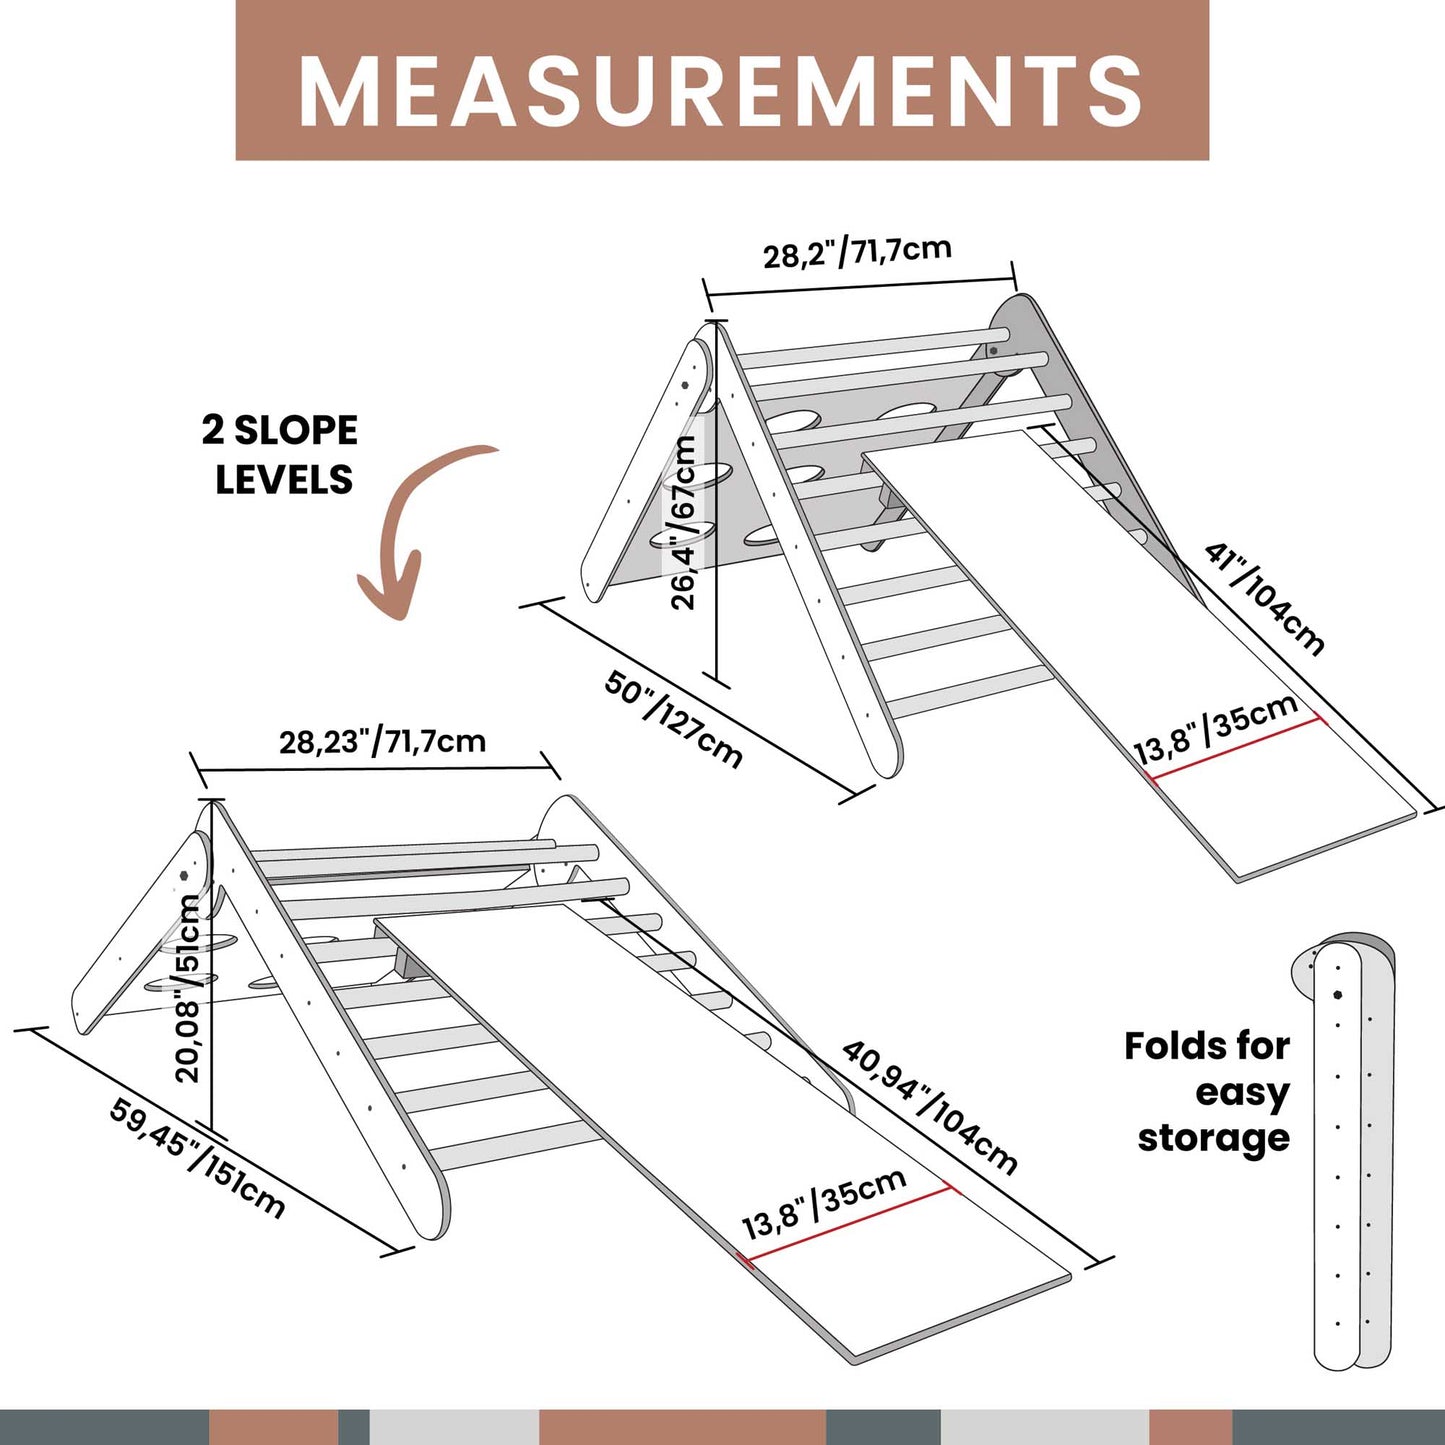 Measurements of a foldable climbing triangle with two sensory sides and an accompanying ramp, providing dimensions for reference.